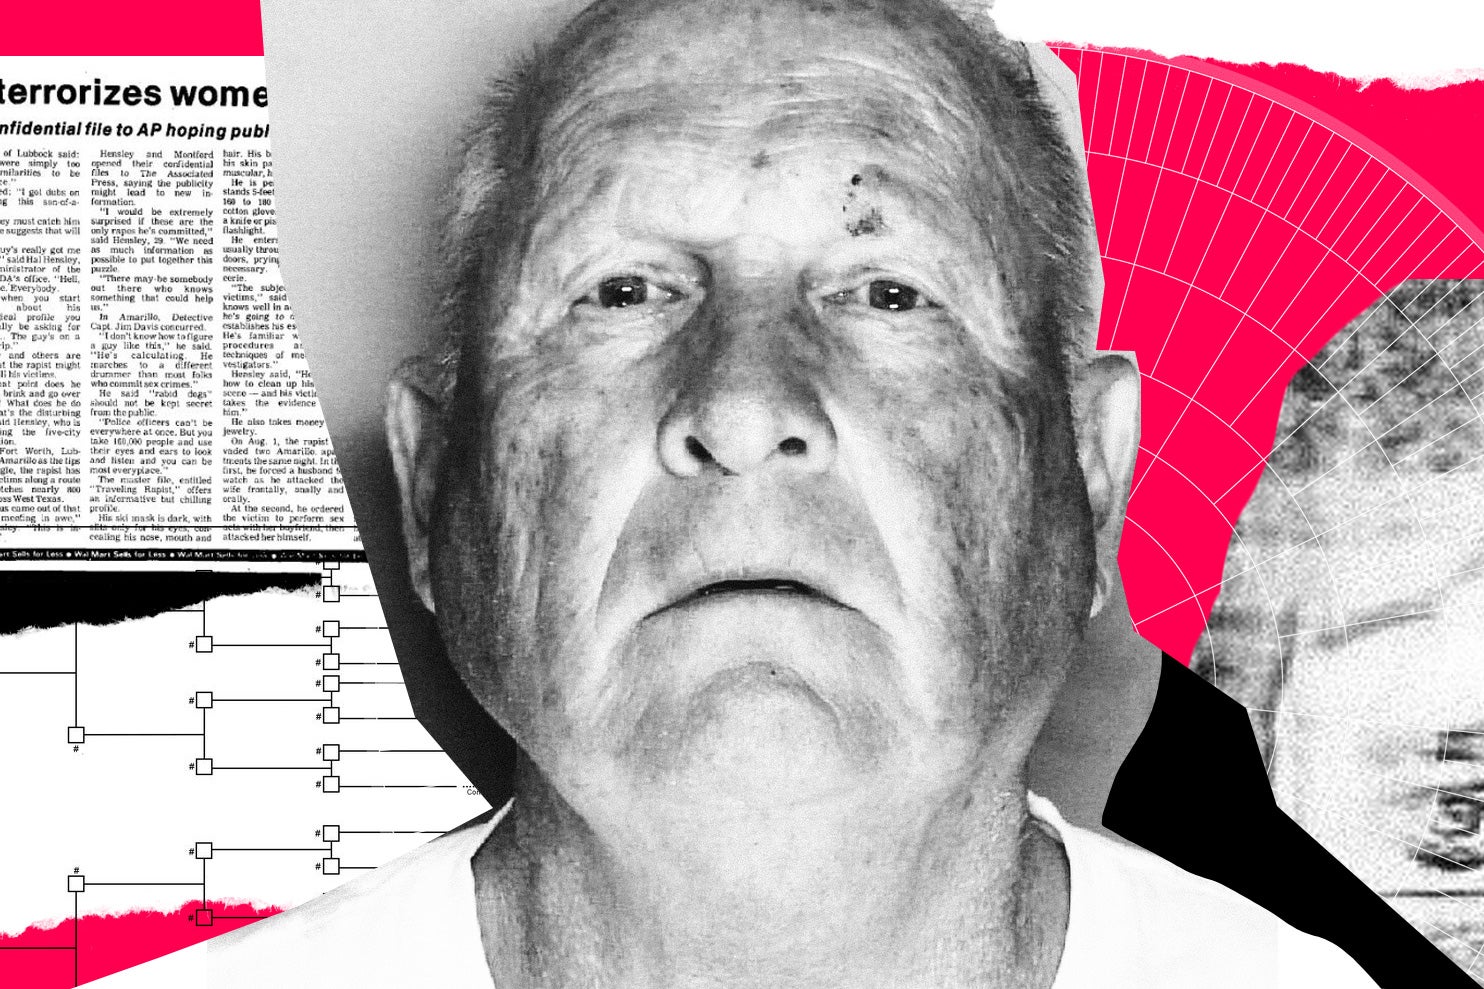 Paul Haynes, researcher for Ill Be Gone in the Dark, on how police found the Golden State Killer suspect.